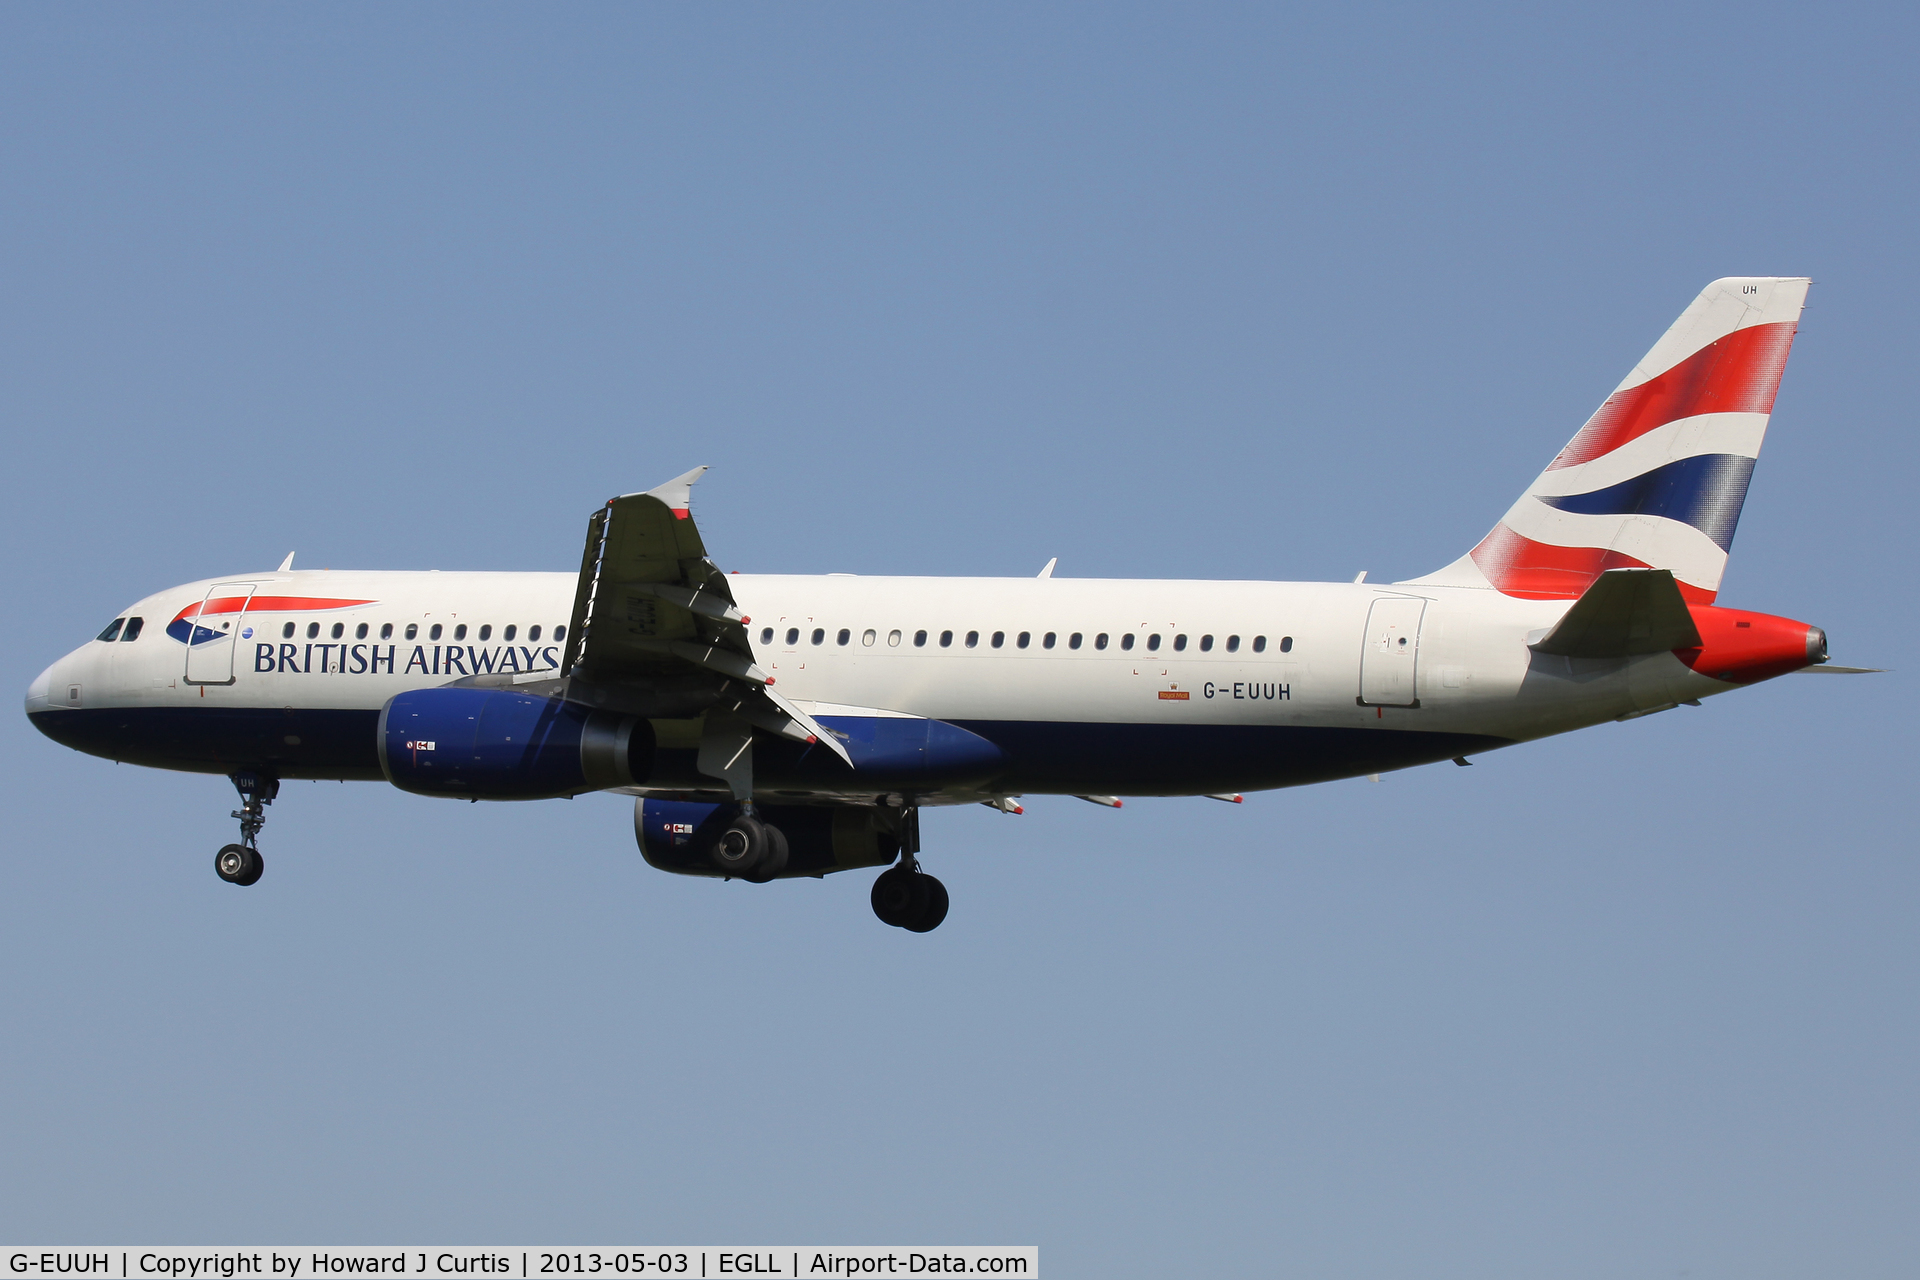 G-EUUH, 2002 Airbus A320-232 C/N 1665, British Airways, on approach to runway 27L.